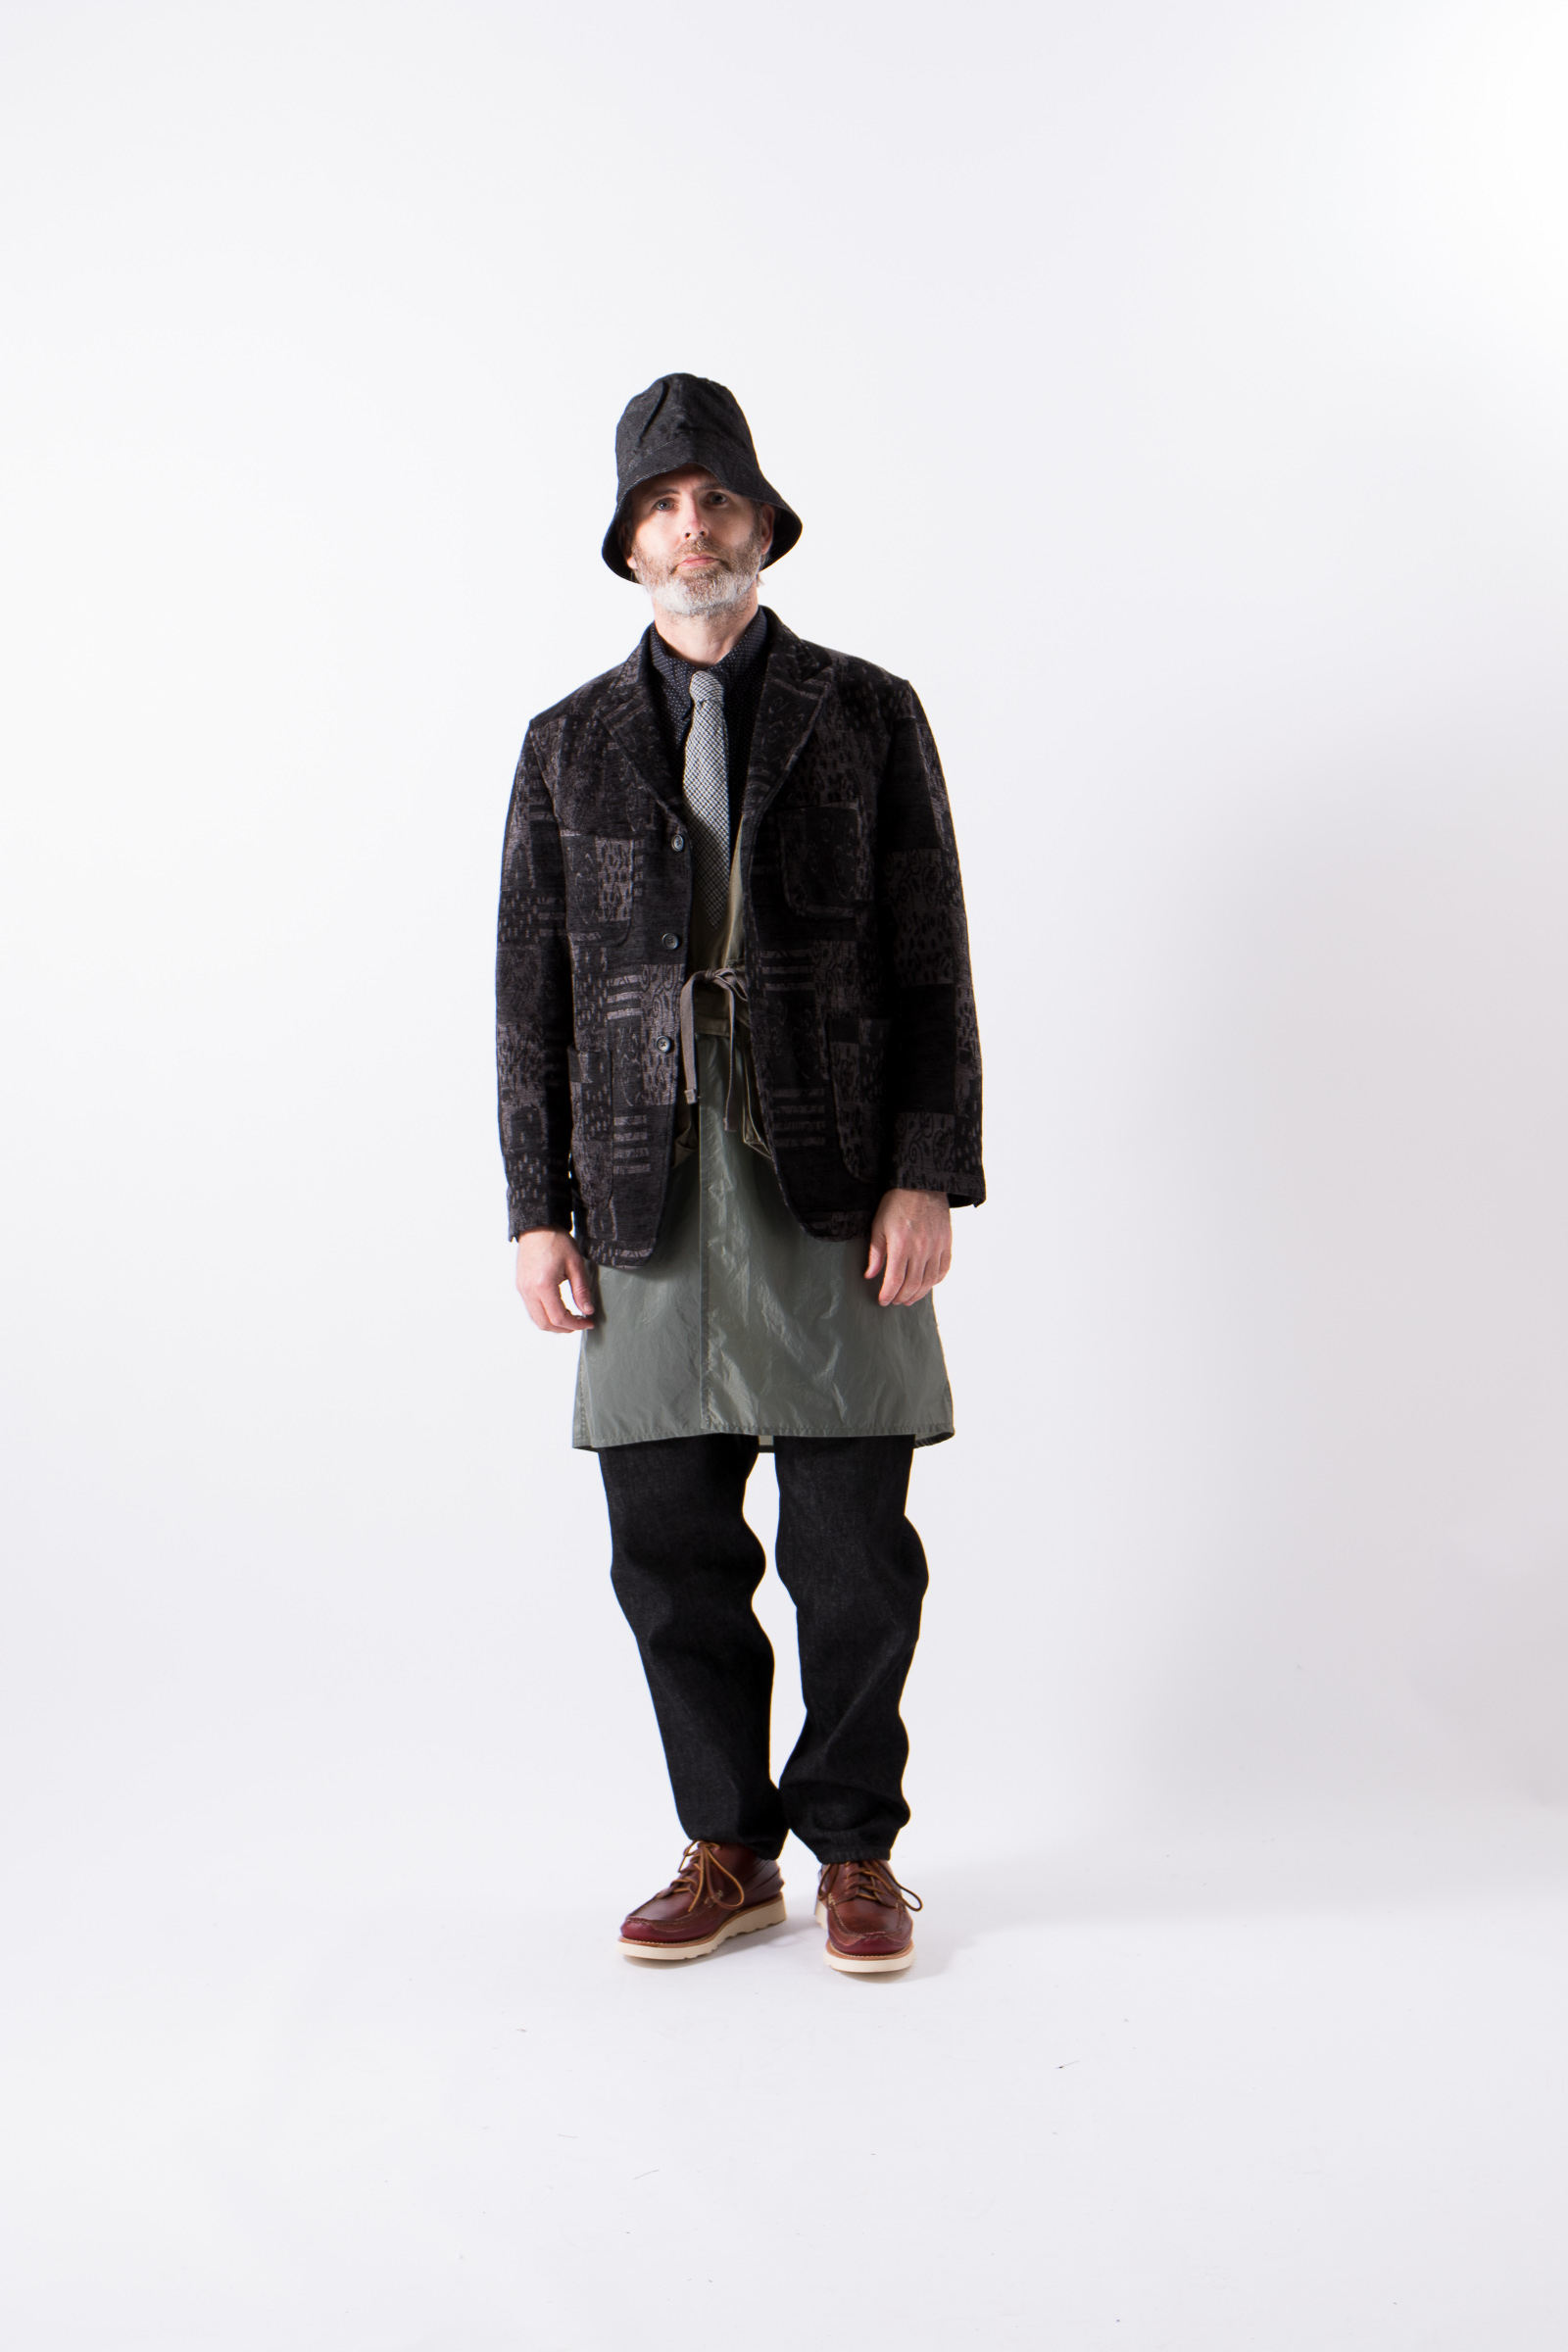 ENGINEERED GARMENTS AW20 DELIVERY 1 - The Bureau Belfast